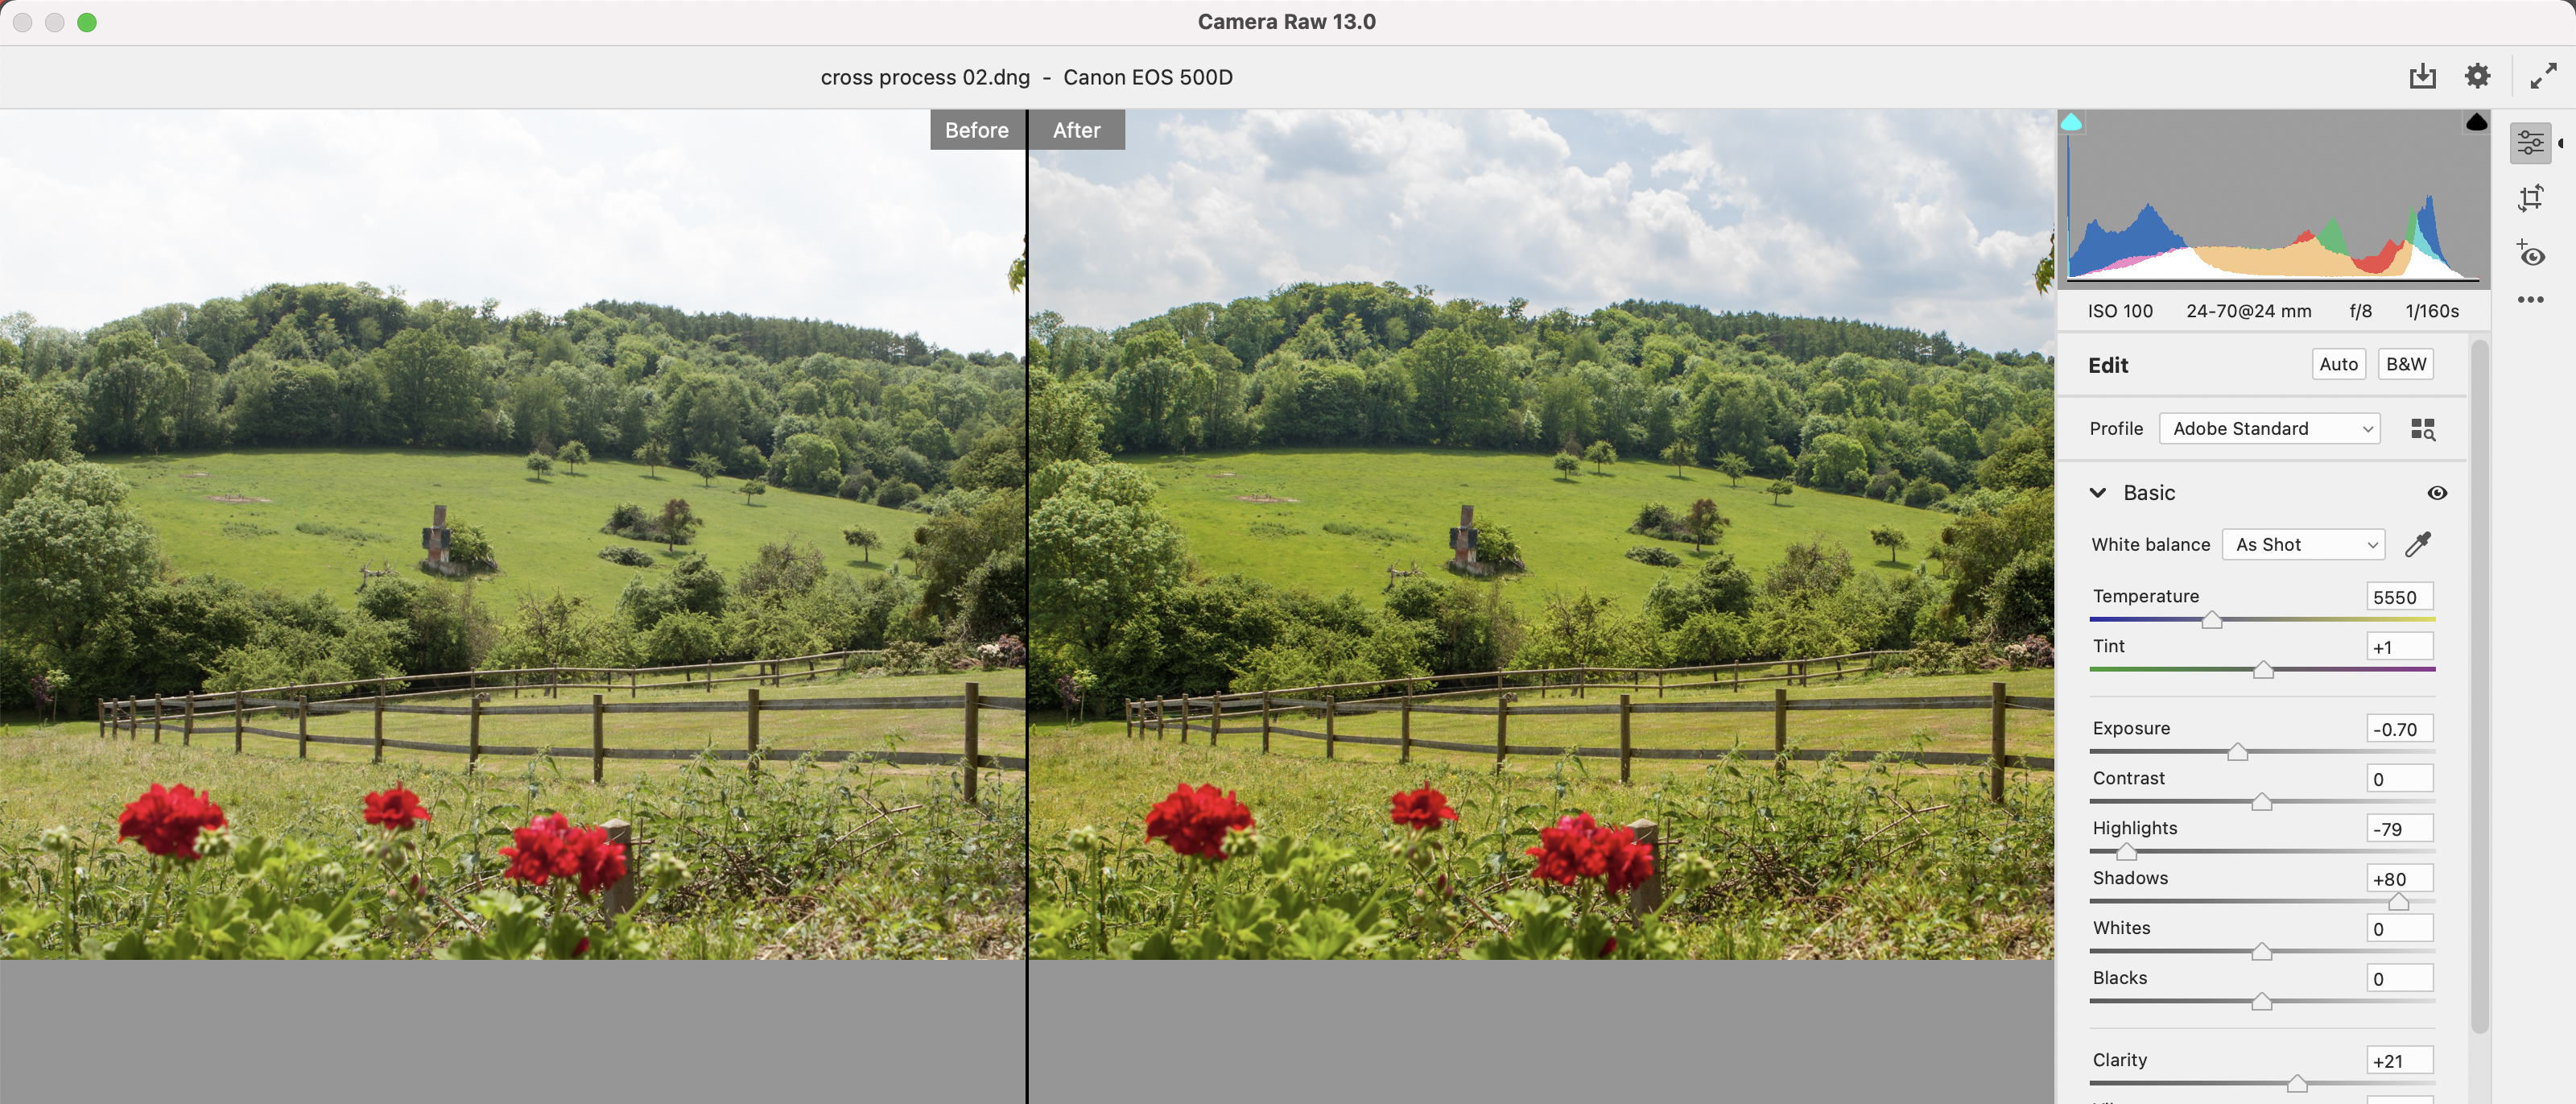 adobe photoshop elements 11 for mac review